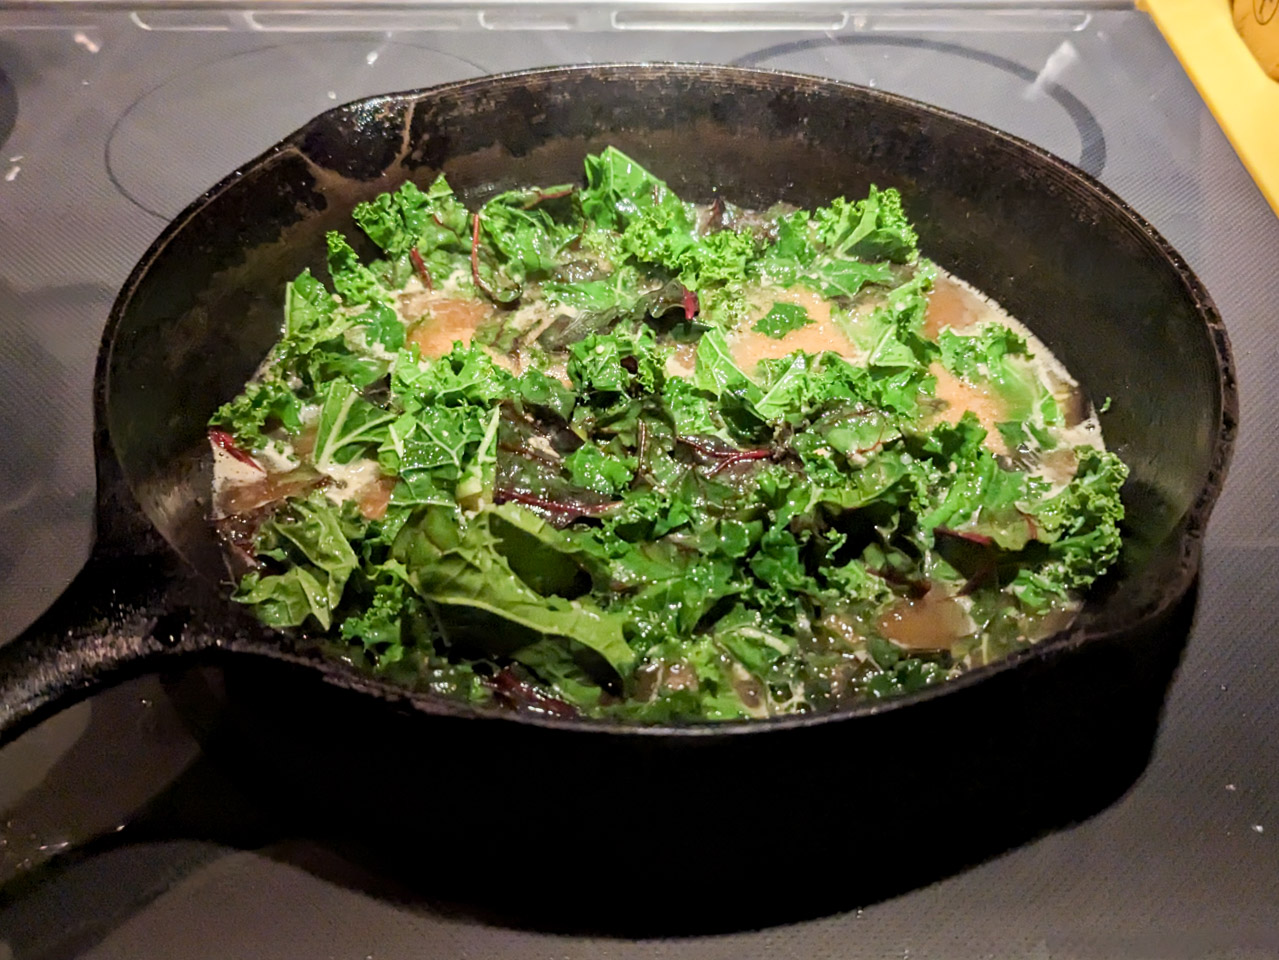 Braising greens and bacon